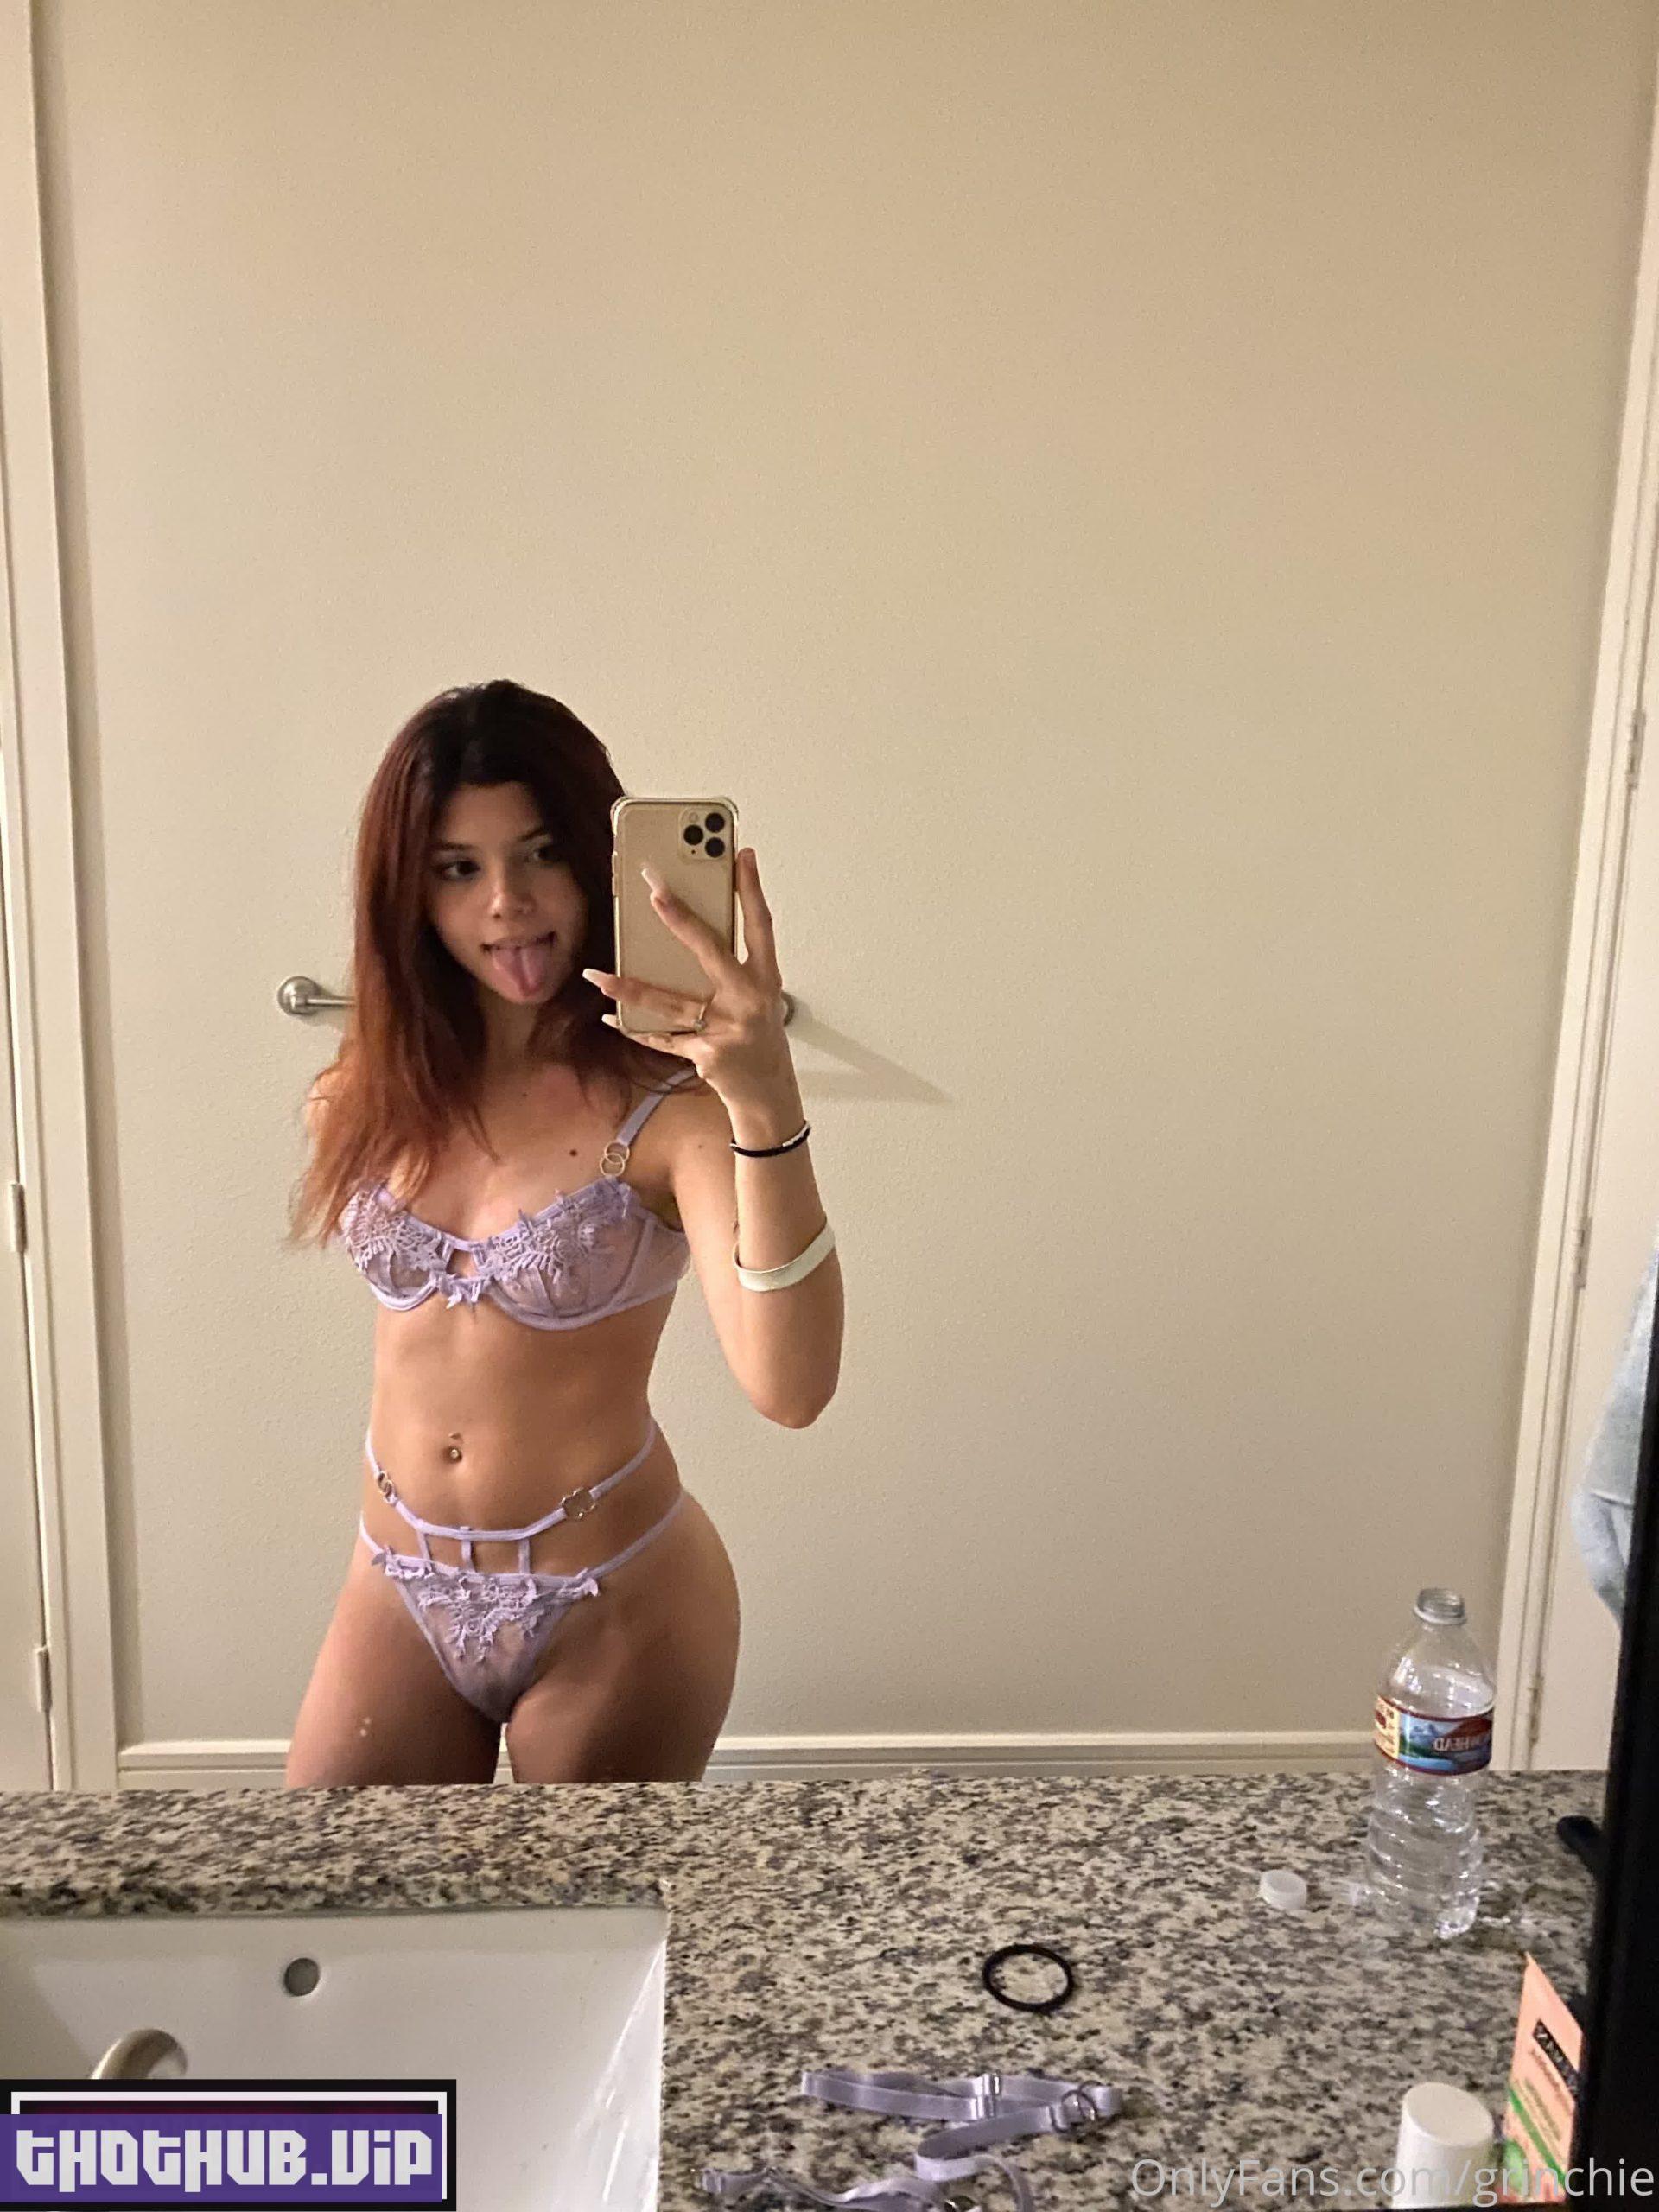 1706553653 813 Puppiwii %E2%80%93 Cute Petite Onlyfans Nudes